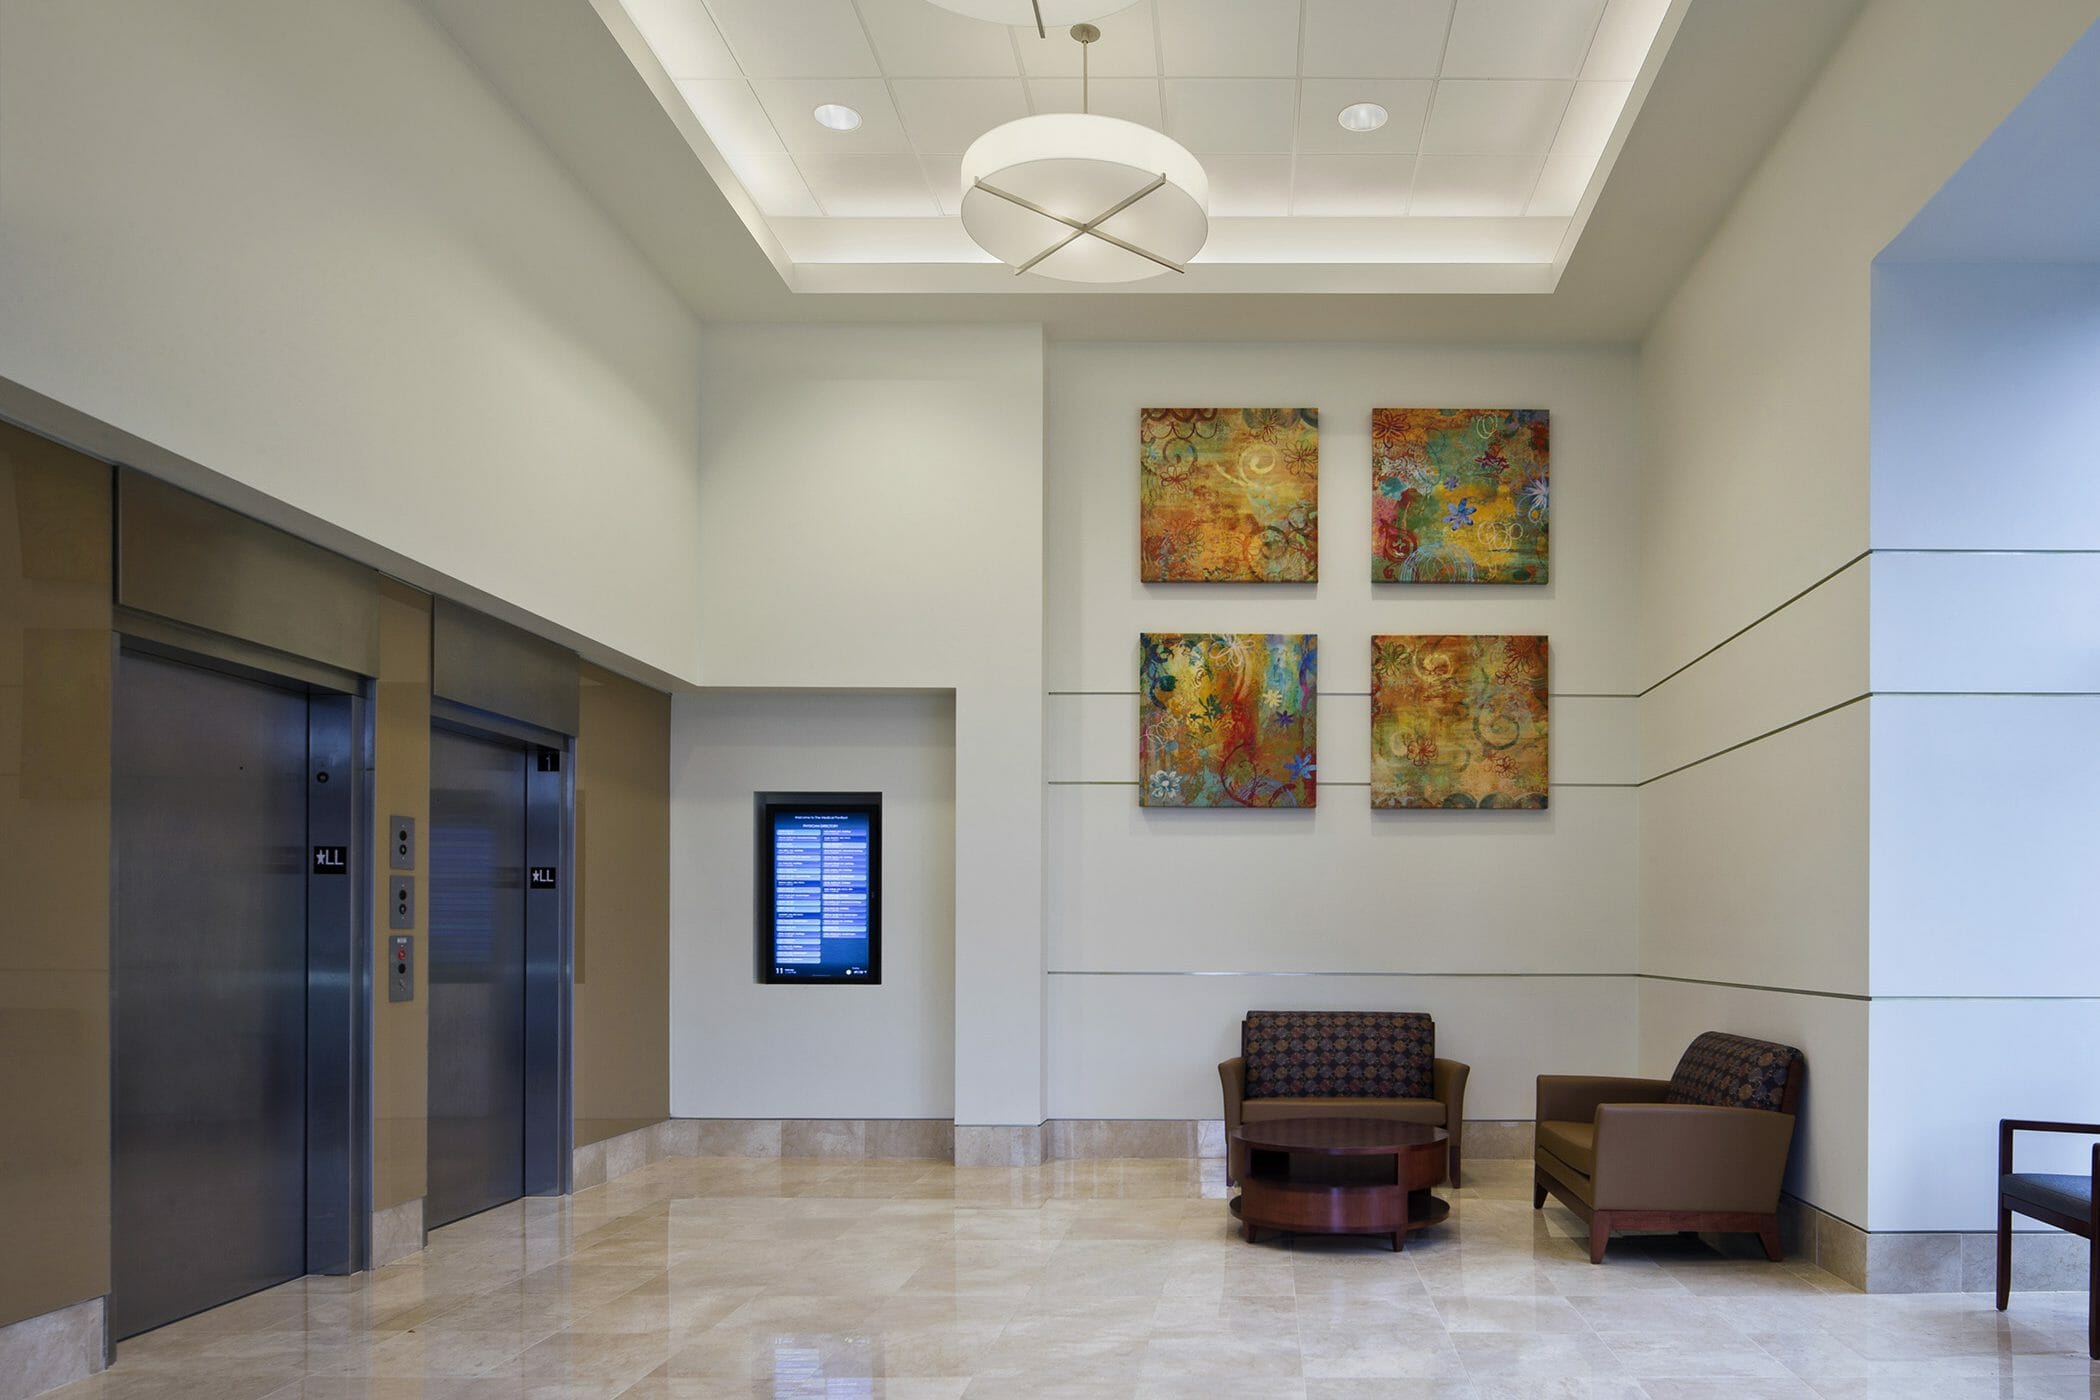 Elevator area on main floor of Angelos Medical Pavilion with tall ceilings and, red chairs, abstract art, and multiple forms of ceiling lights